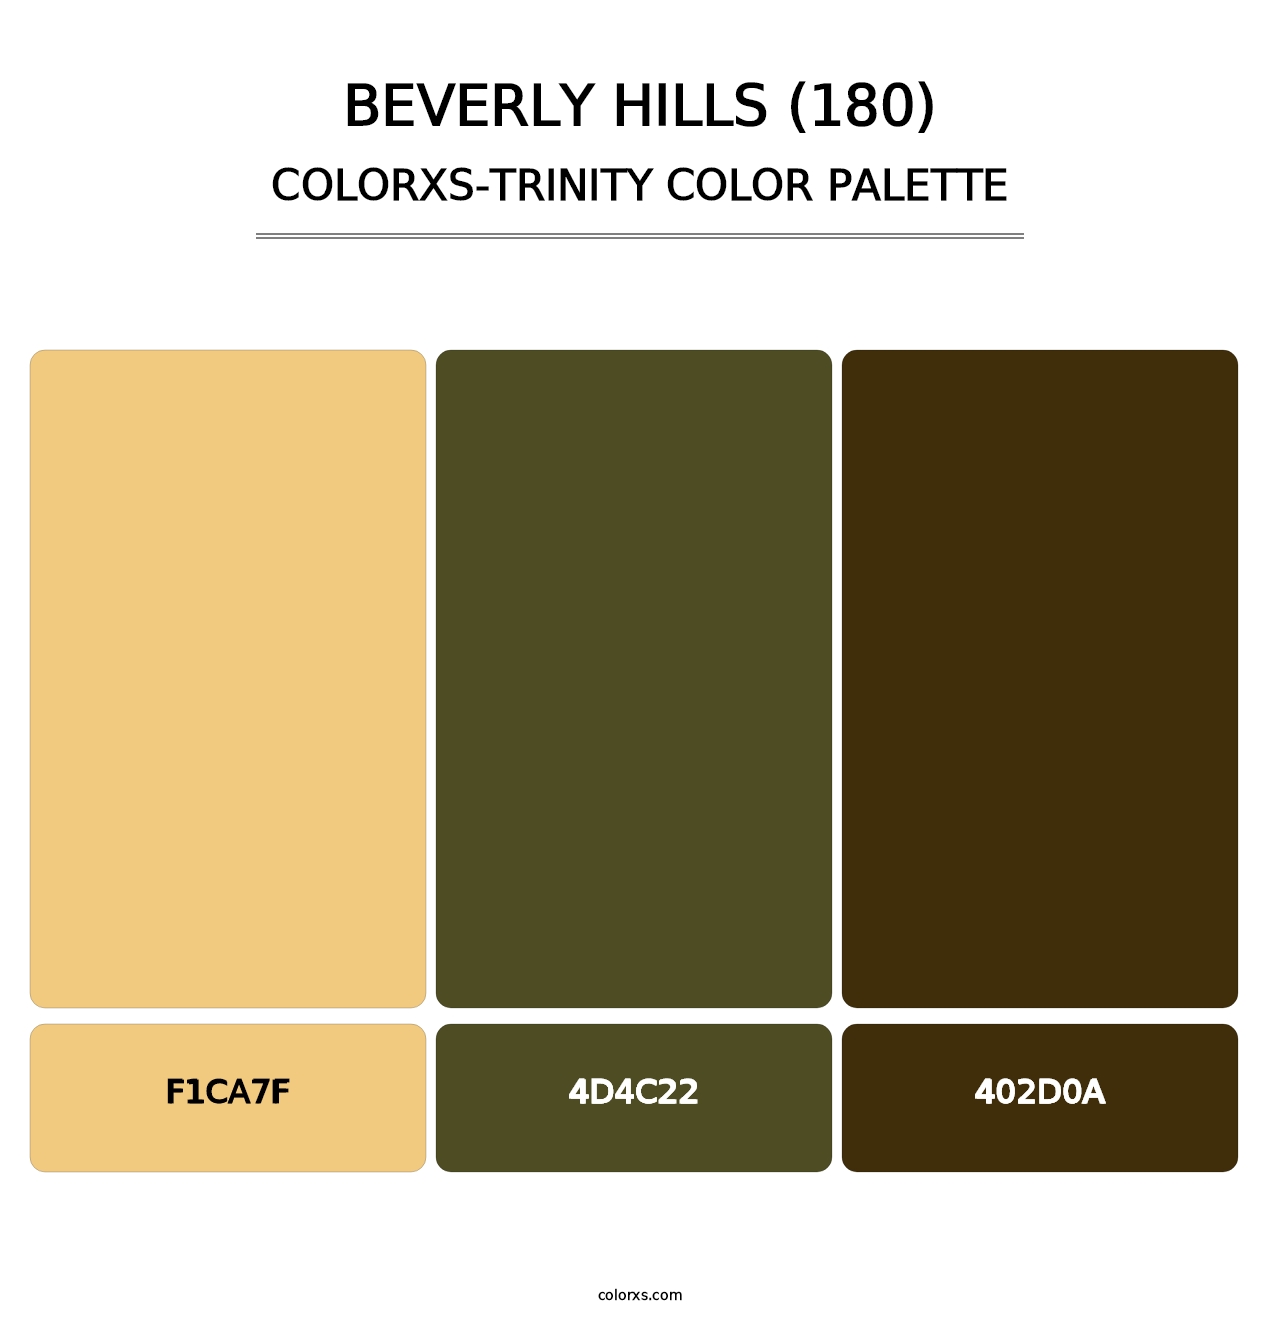 Beverly Hills (180) - Colorxs Trinity Palette